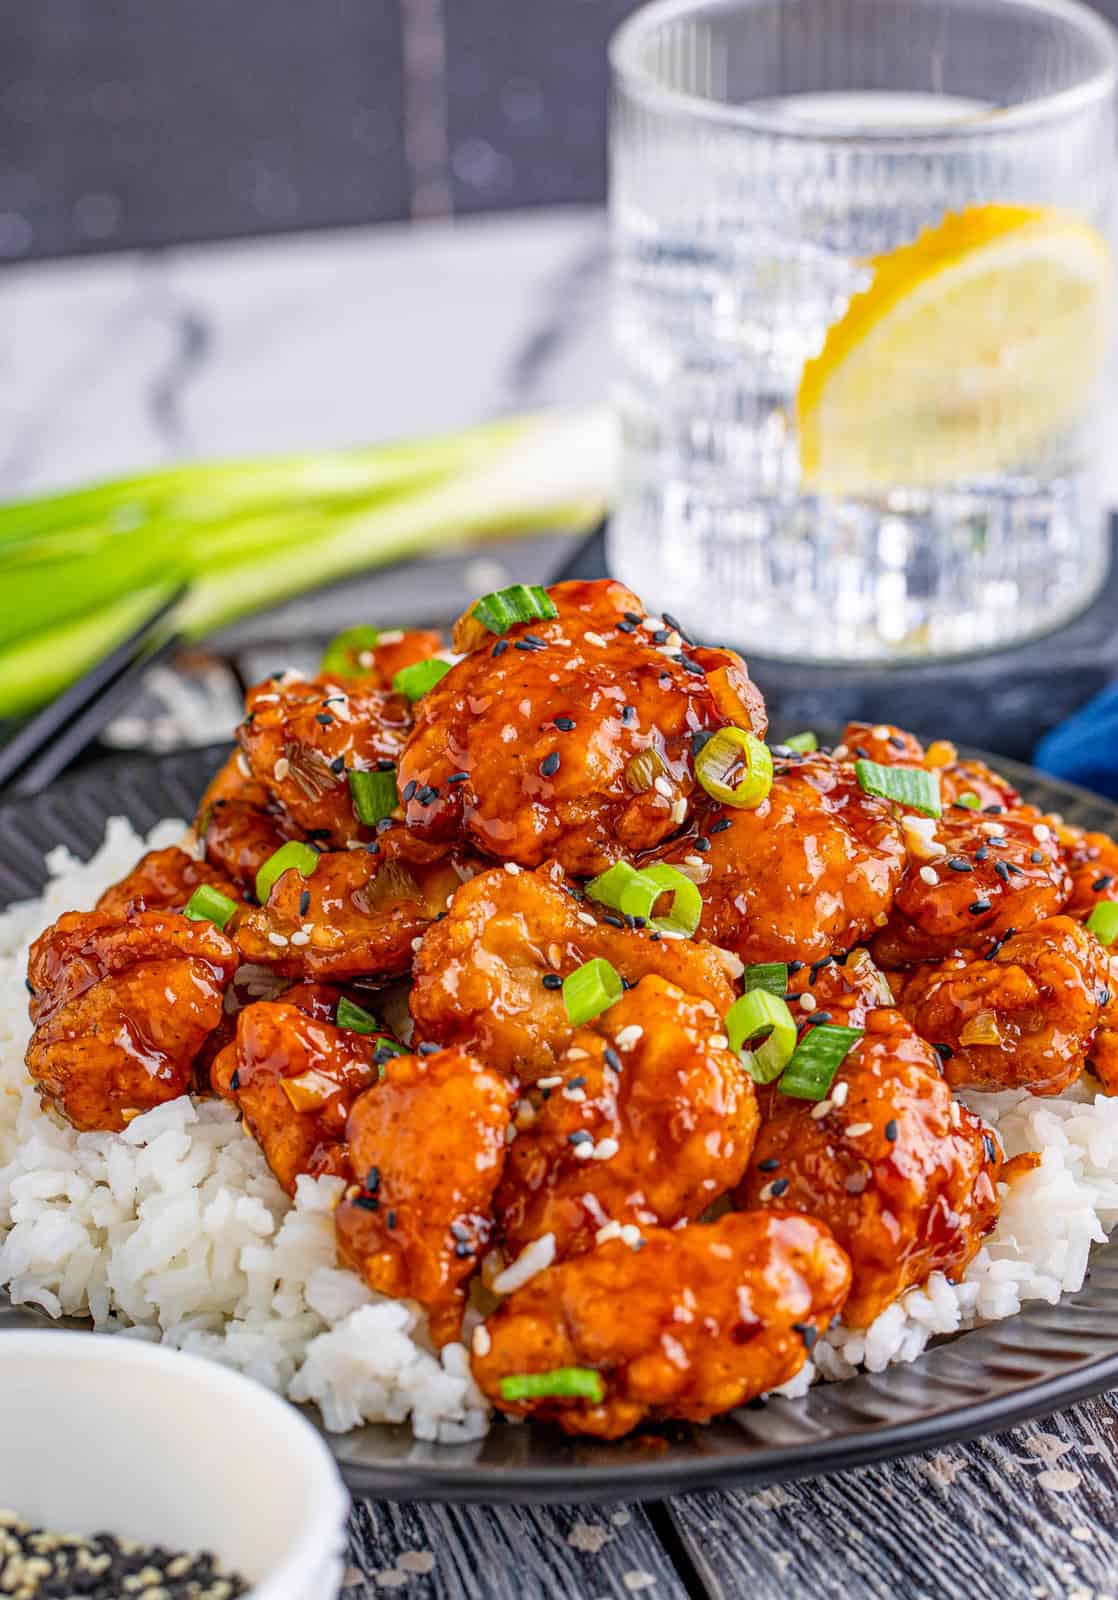 Plate with rice and Sesame Chicken Recipe over rice with water in background.